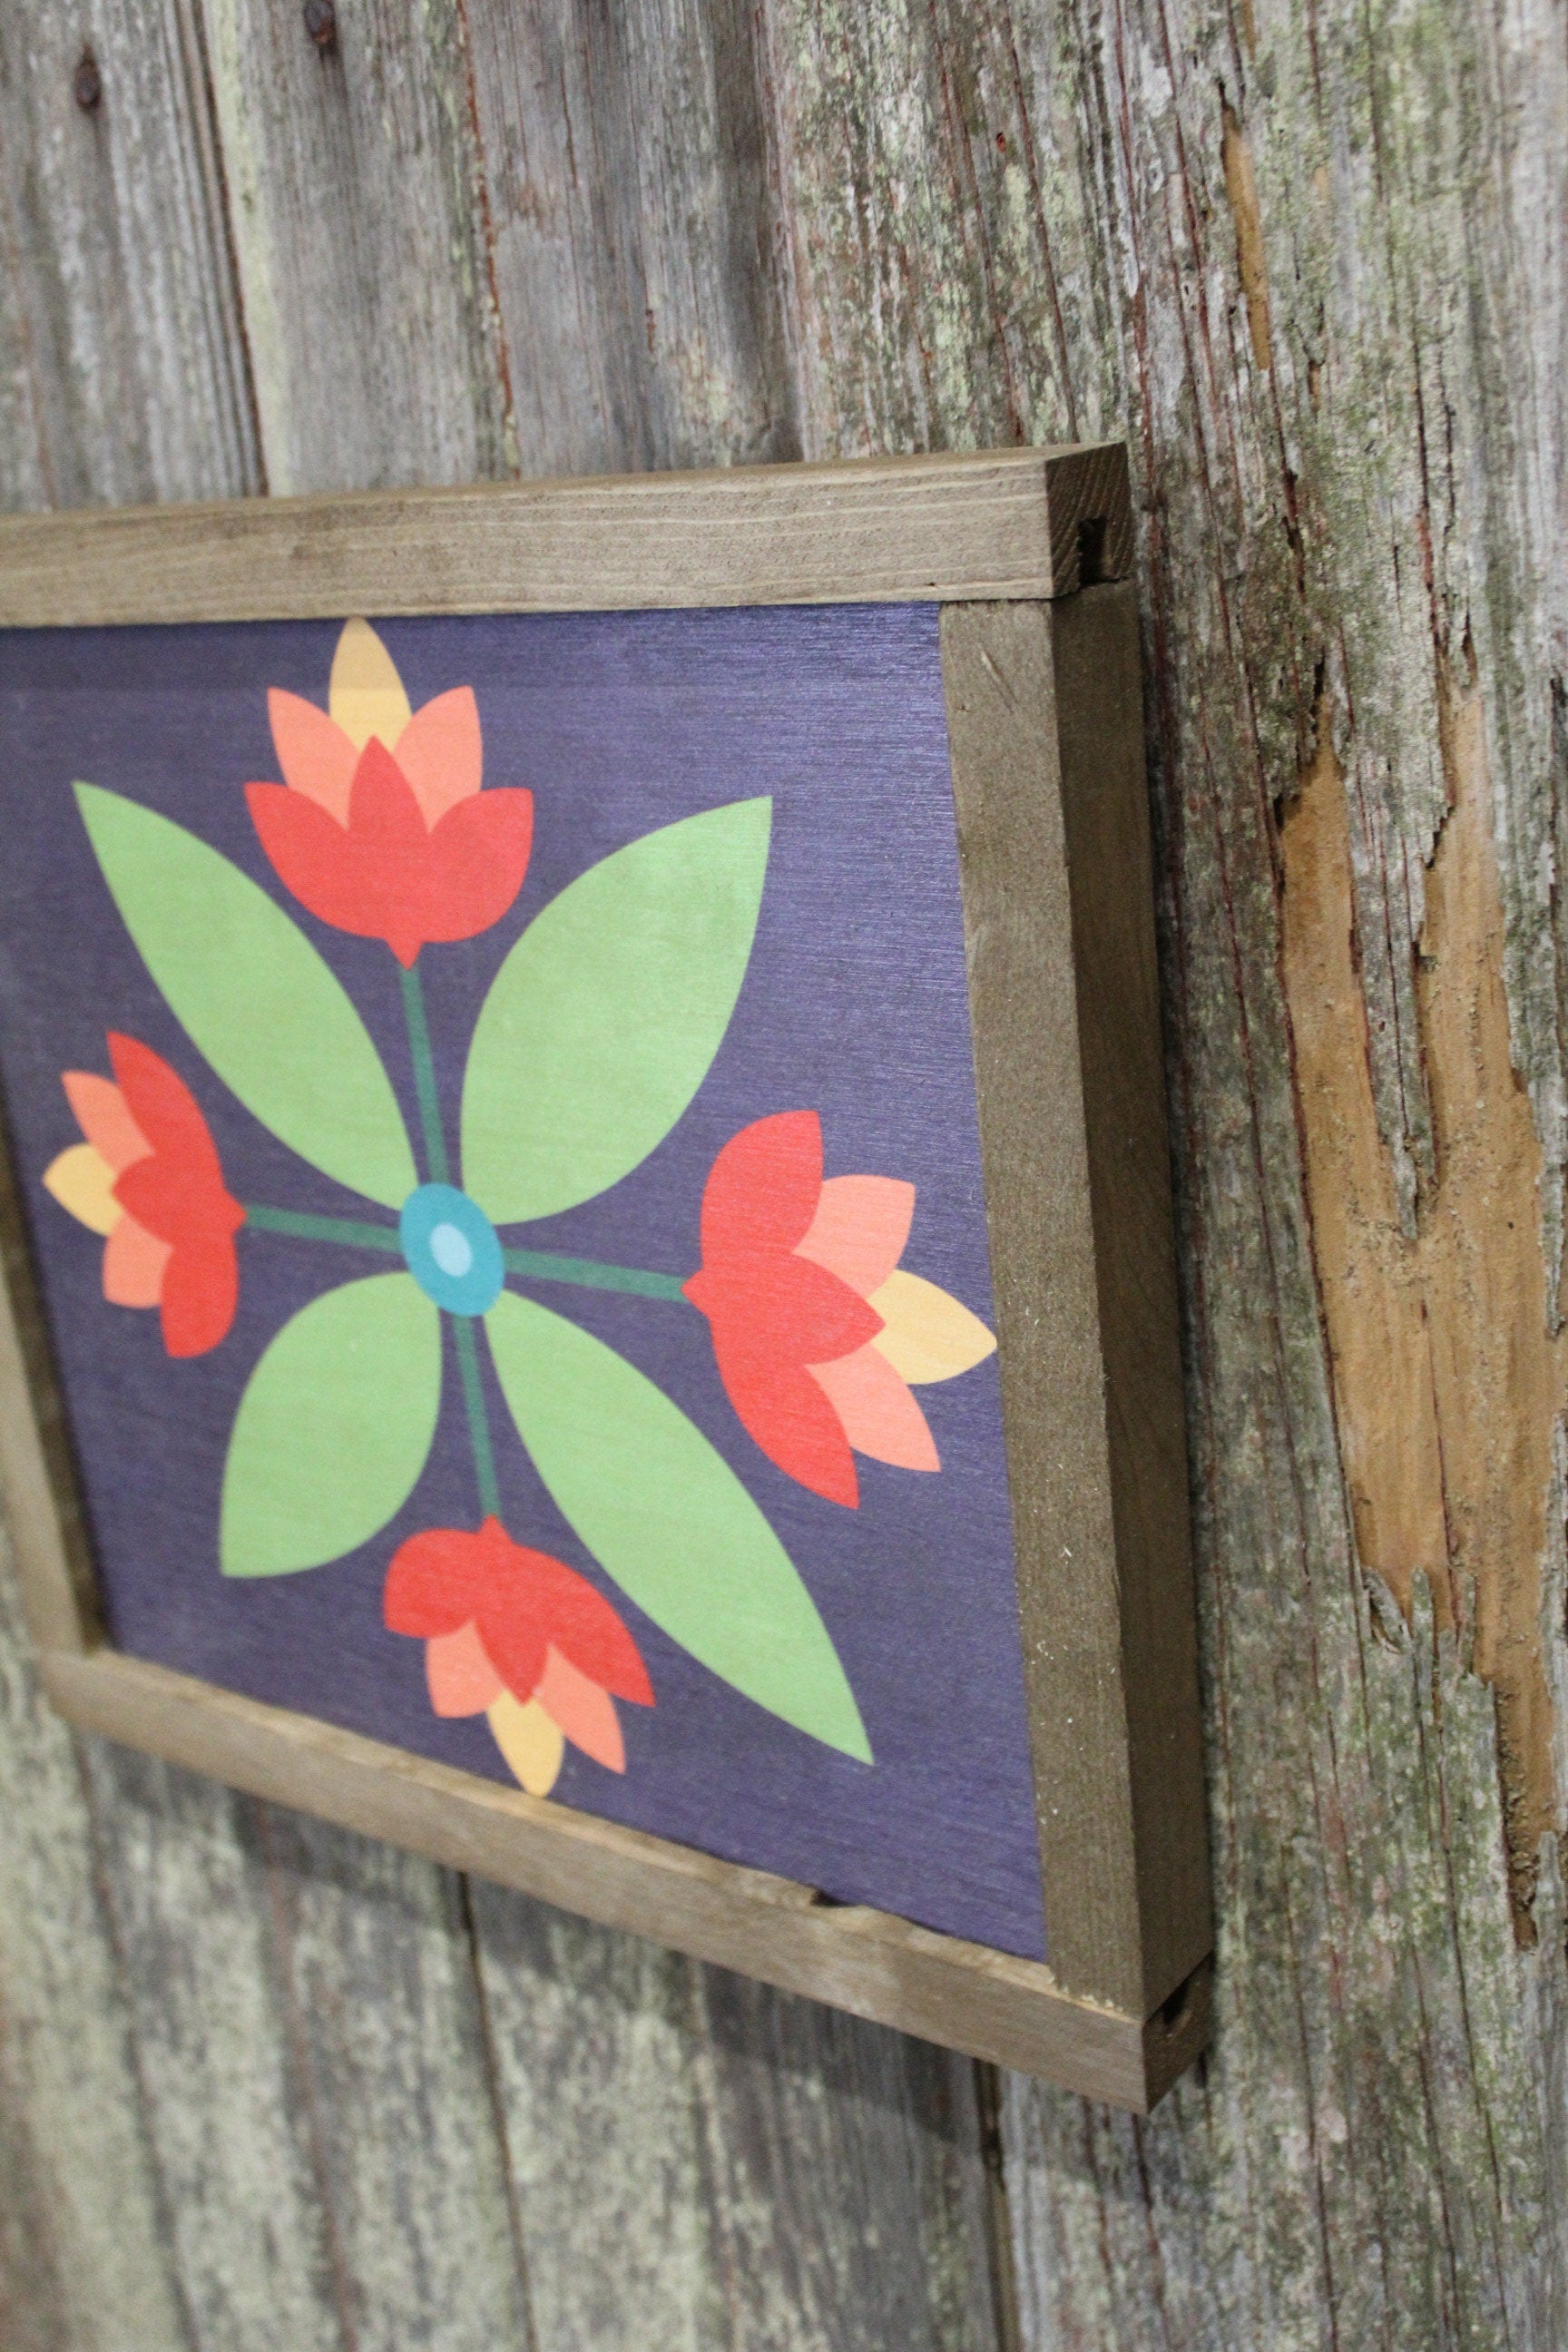 Tulip Barn Quilt Wood Sign Flower Bloom Floral Red Orange Yellow Green Country Square Pattern Block Wall Art Farmhouse Primitive Rustic